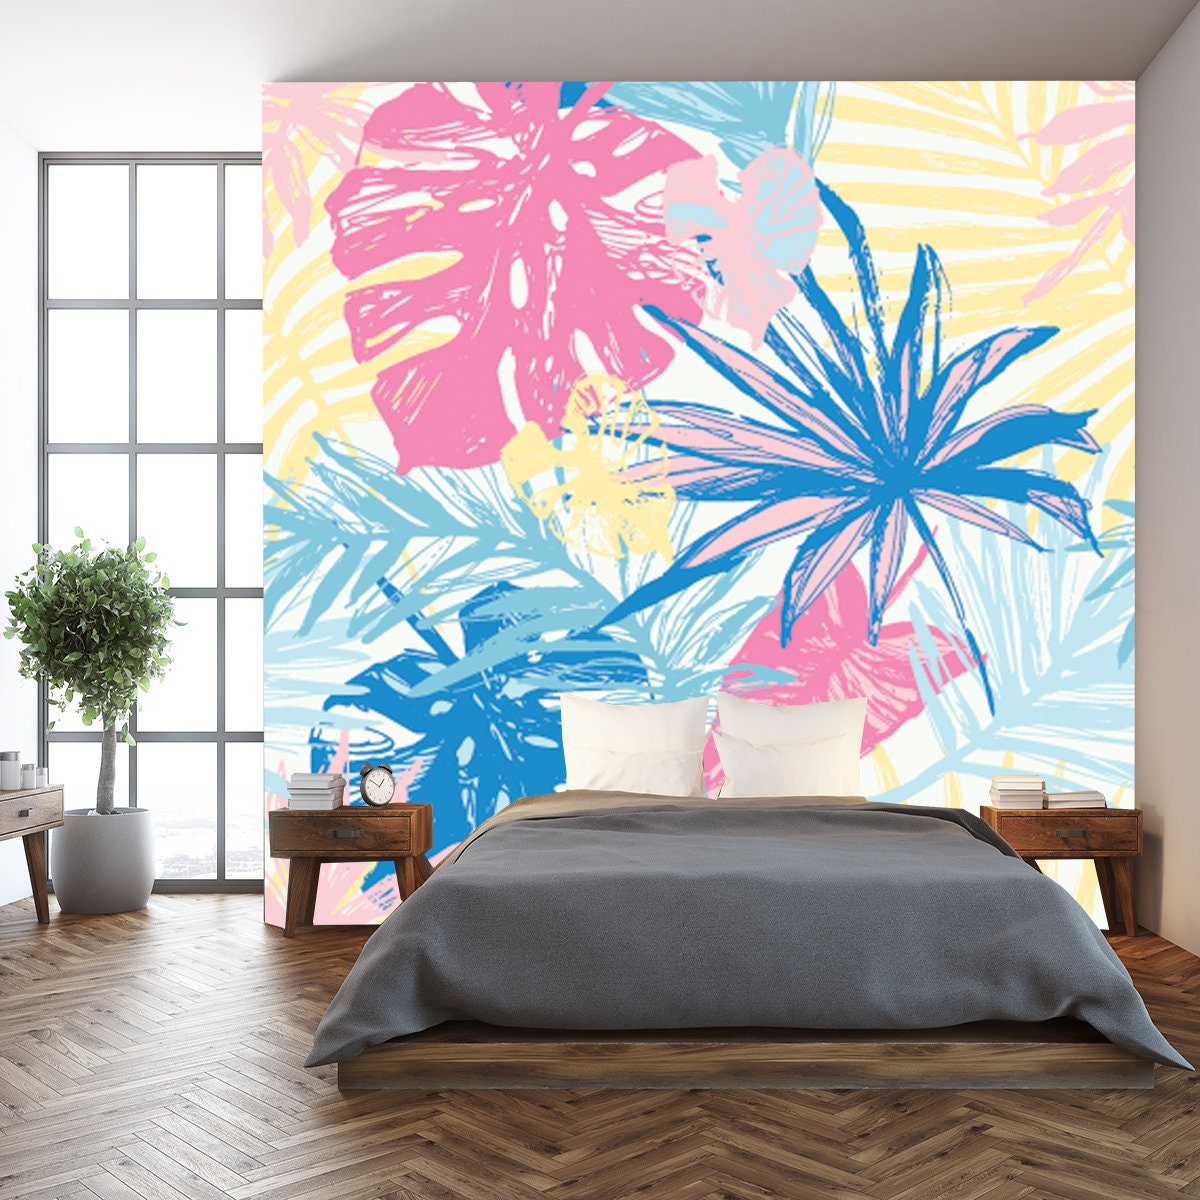 Tropical Leaf Silhouette Elements Background. Palm, Fan Palm, Monstera, Banana Leaf in Grunge Retro Style Wallpaper Bedroom Mural